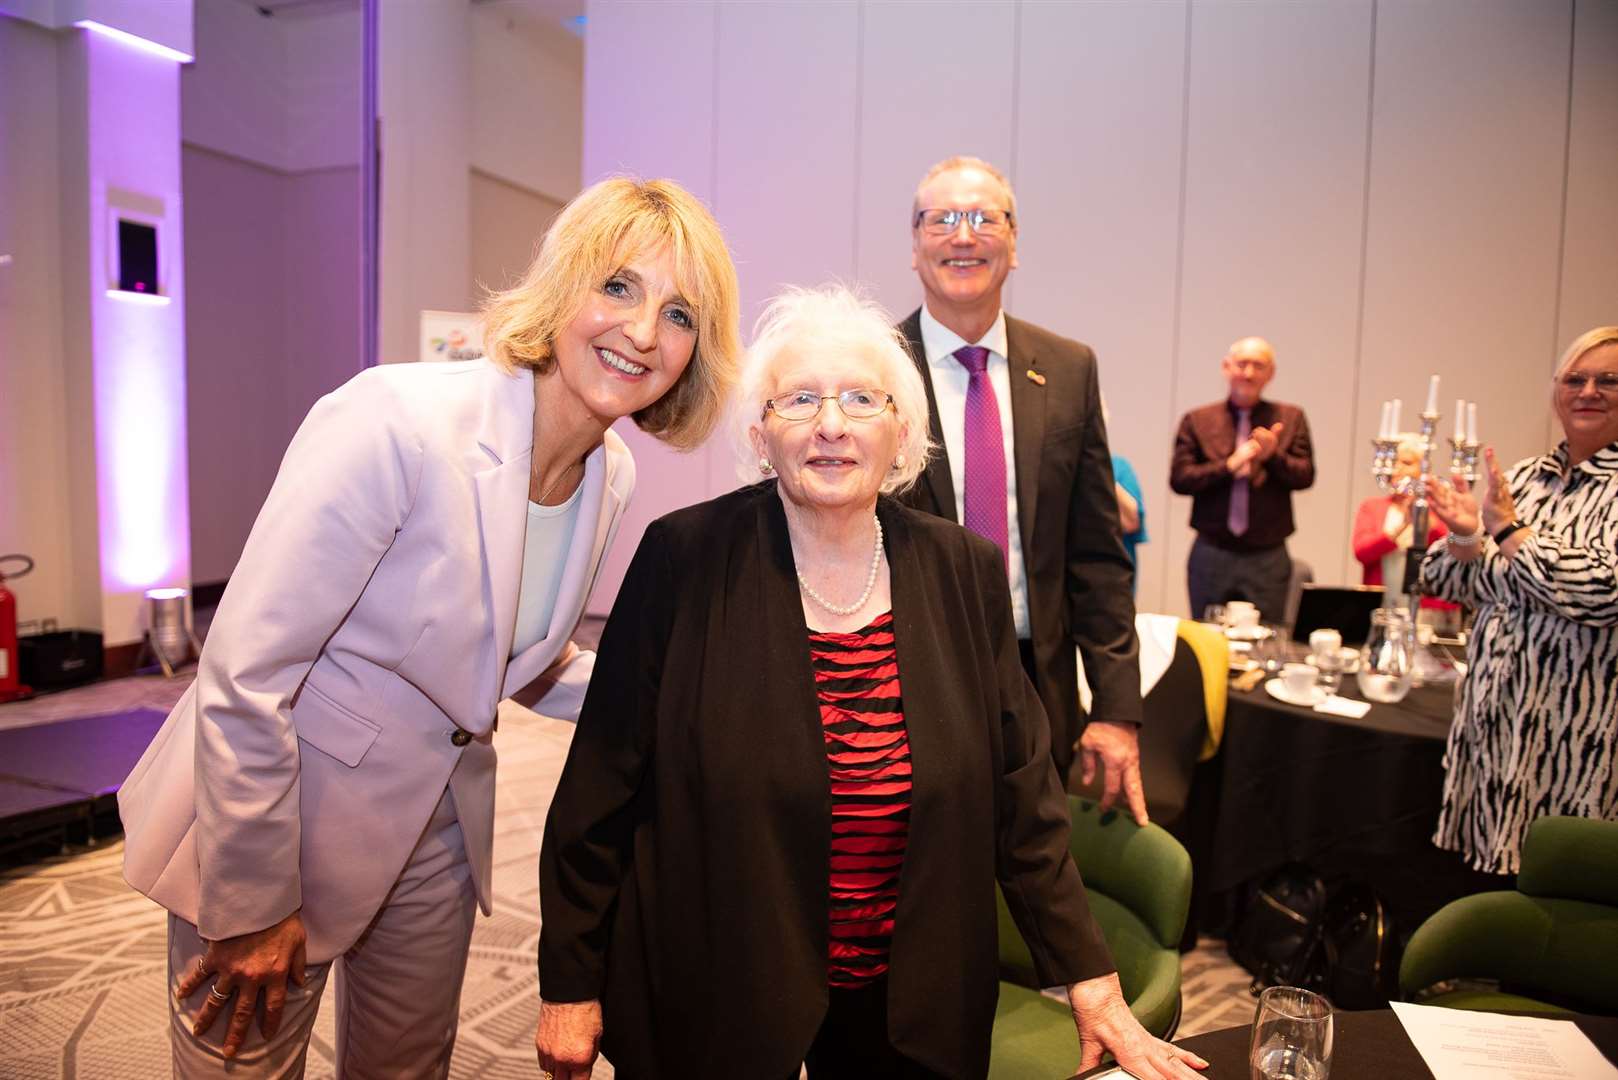 Anne McCreadie with Kaye Adams, who chaired the awards ceremony, and Brian Sloan, chief executive of Age Scotland.